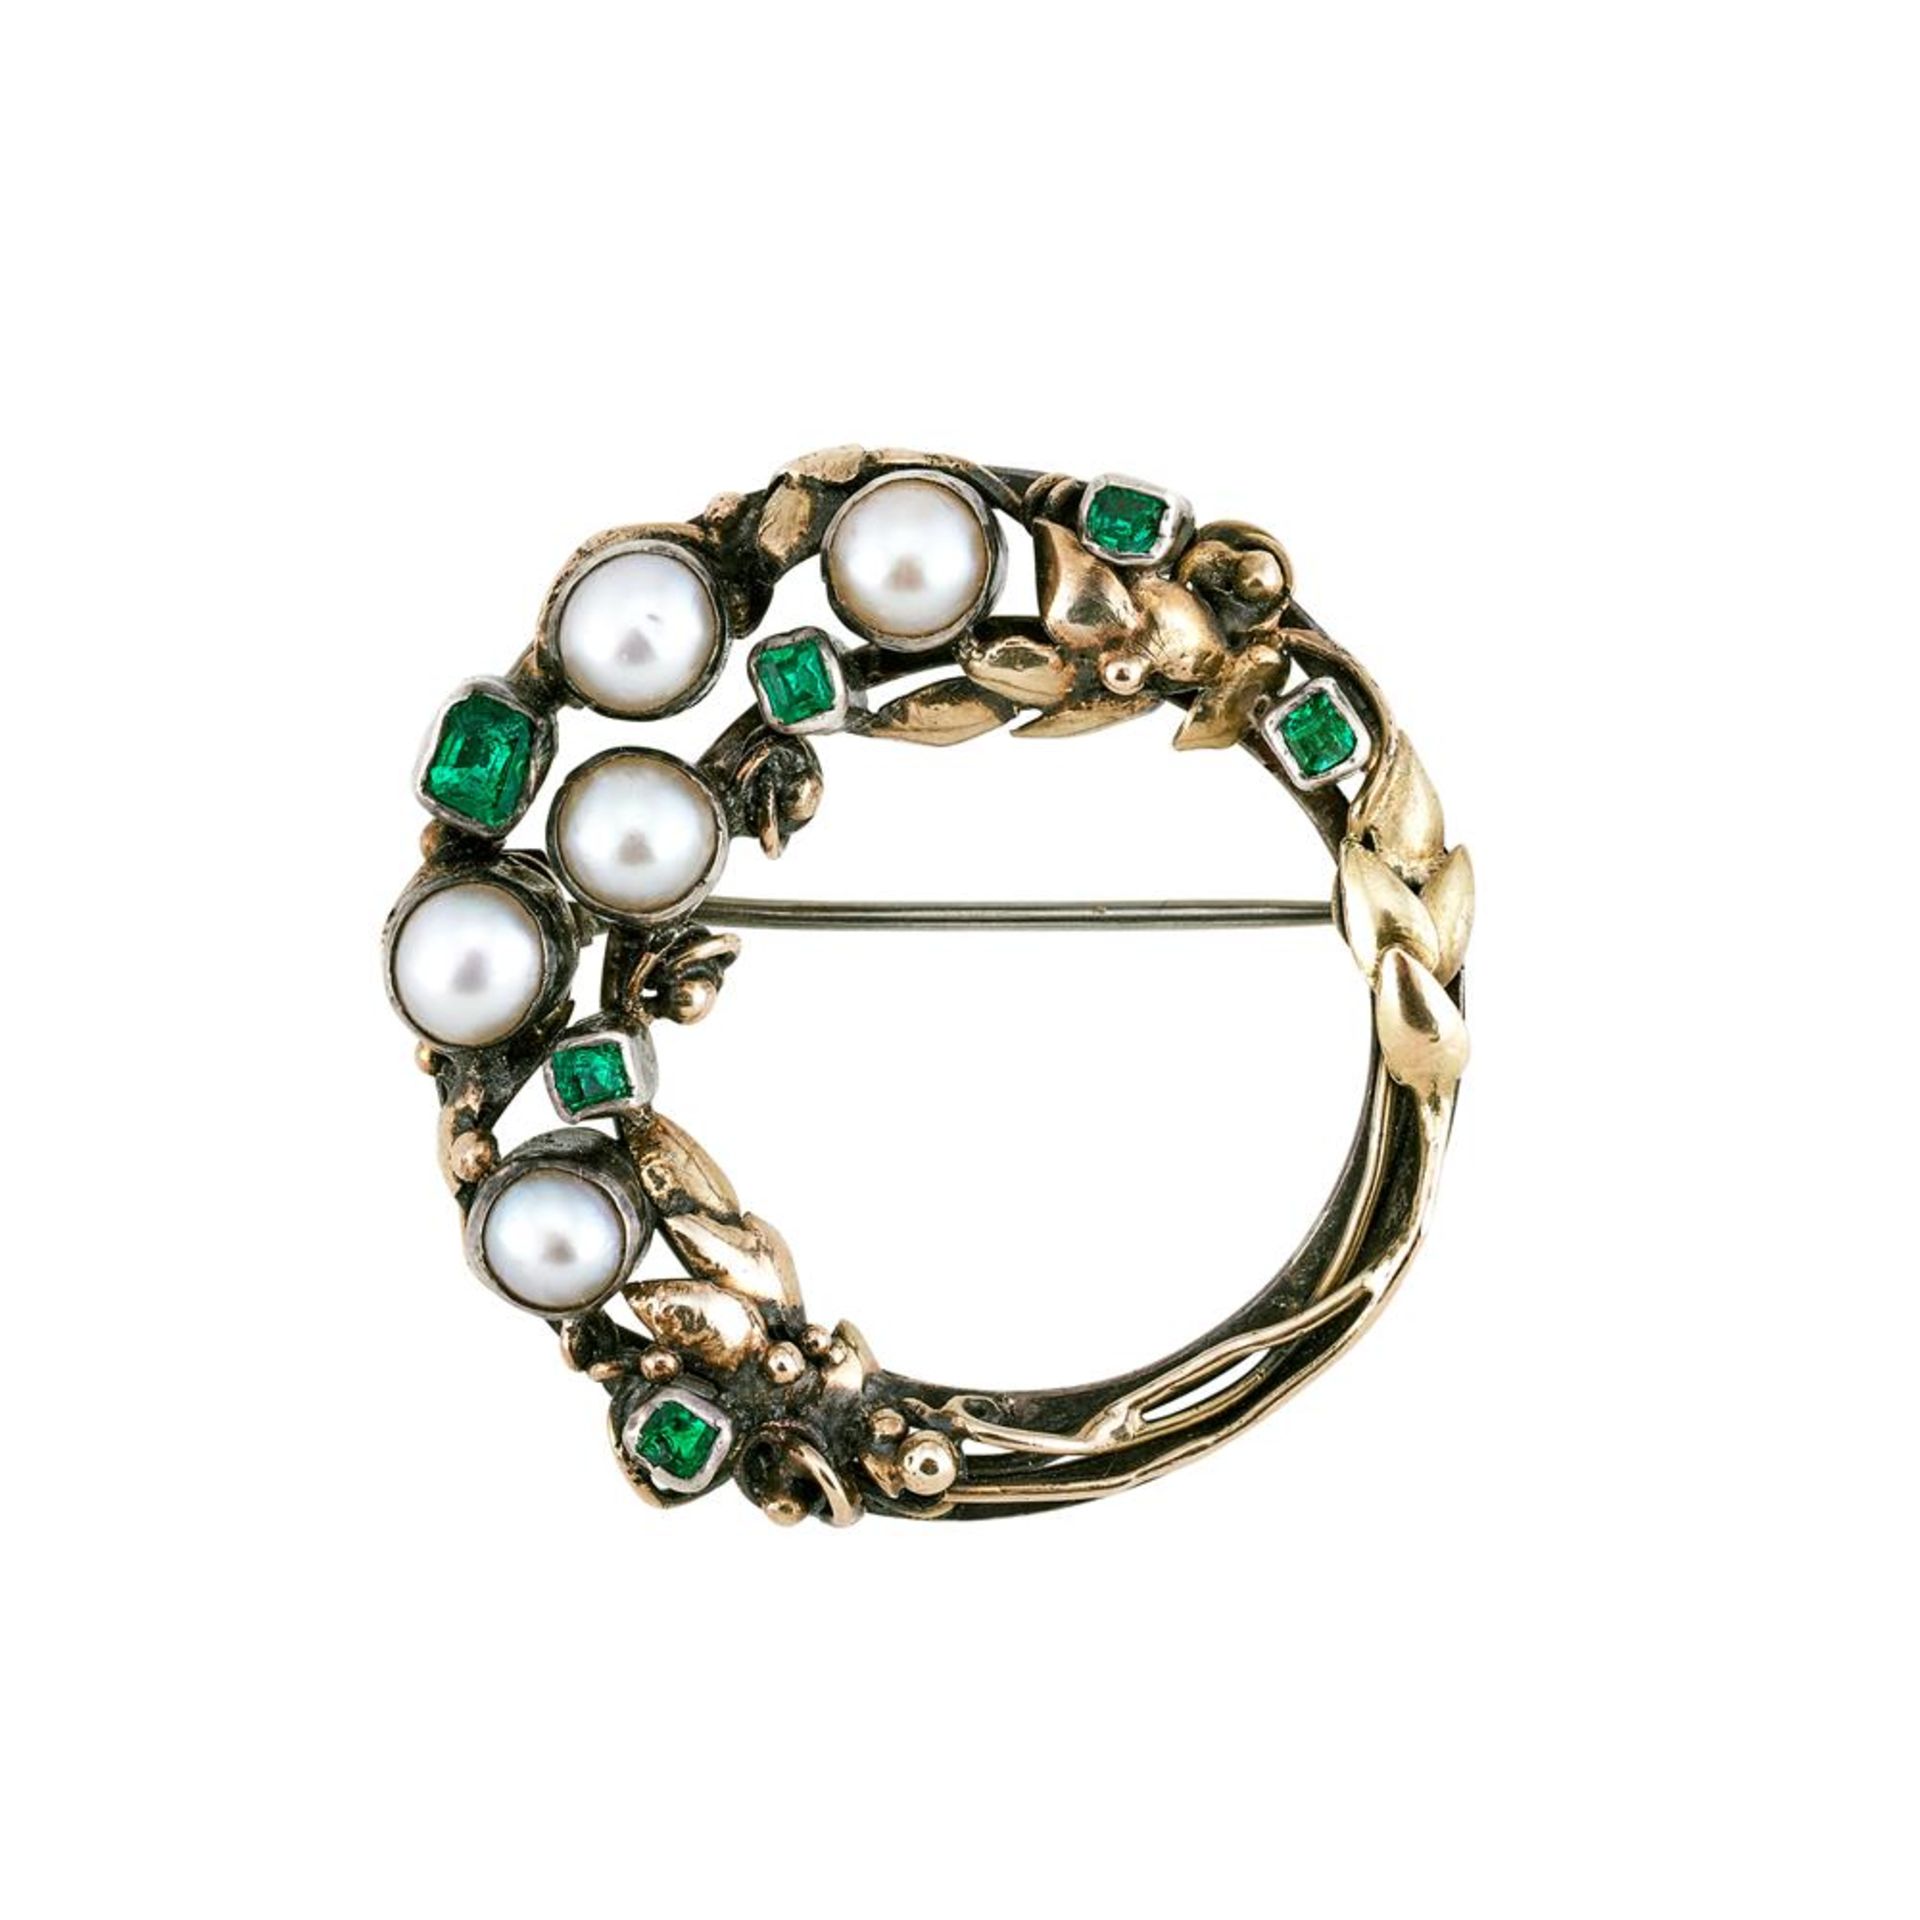 ATTRIBUTED TO DORRIE NOSSITER, A HALF CULTURED PEARL AND EMERALD HOOPED BROOCH, CIRCA 1930